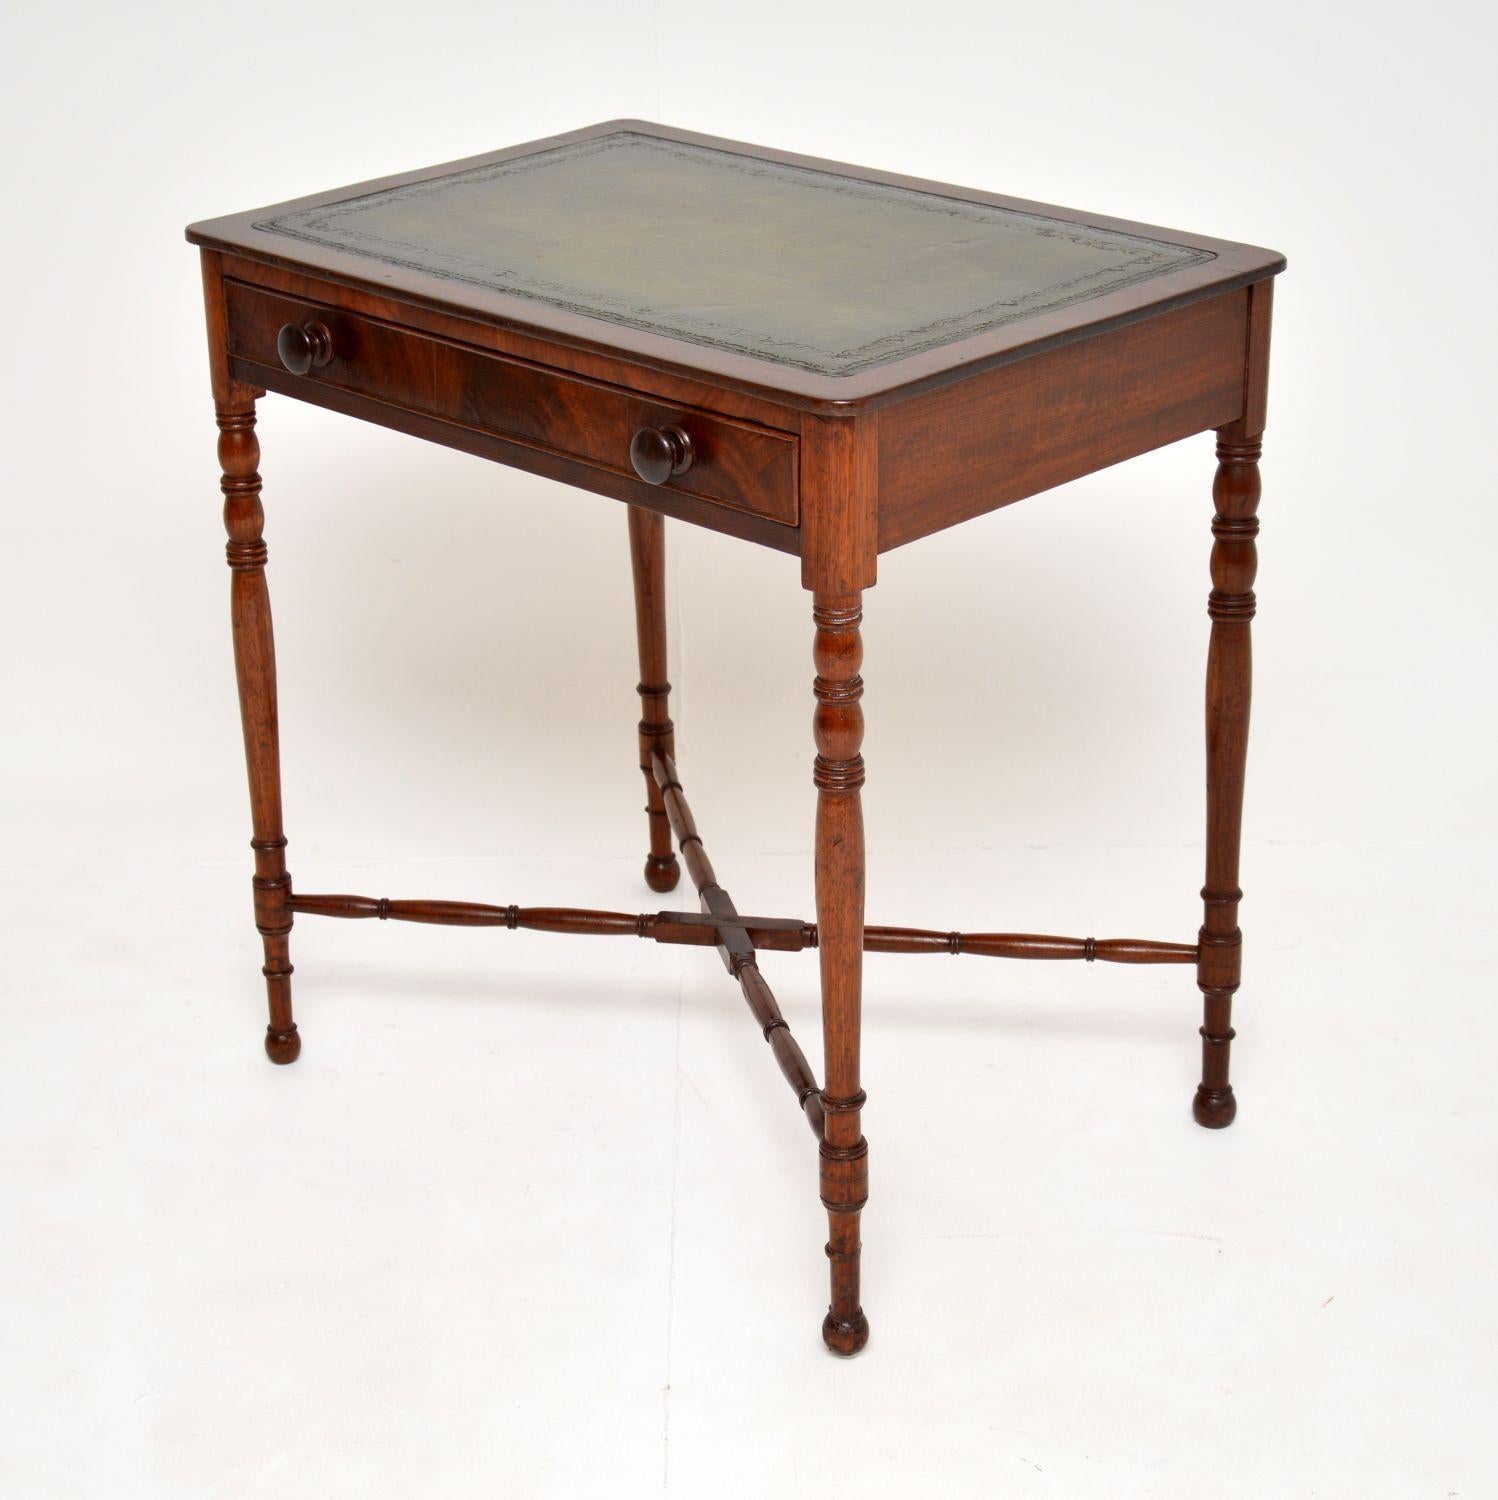 English Antique Victorian Leather Top Writing Table / Desk